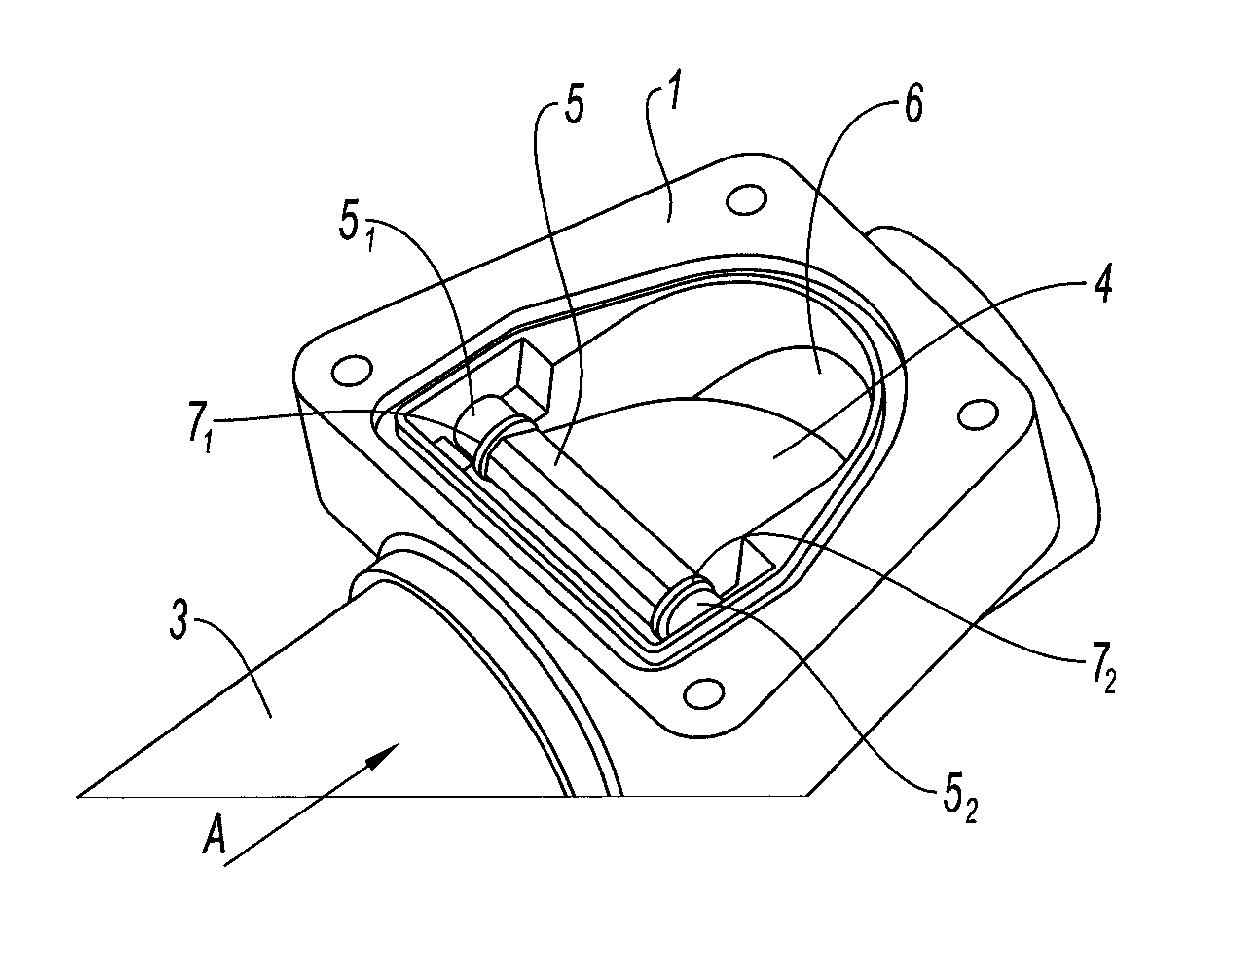 Anti-noise device for the air intake conduit of a supercharged internal combustion engine